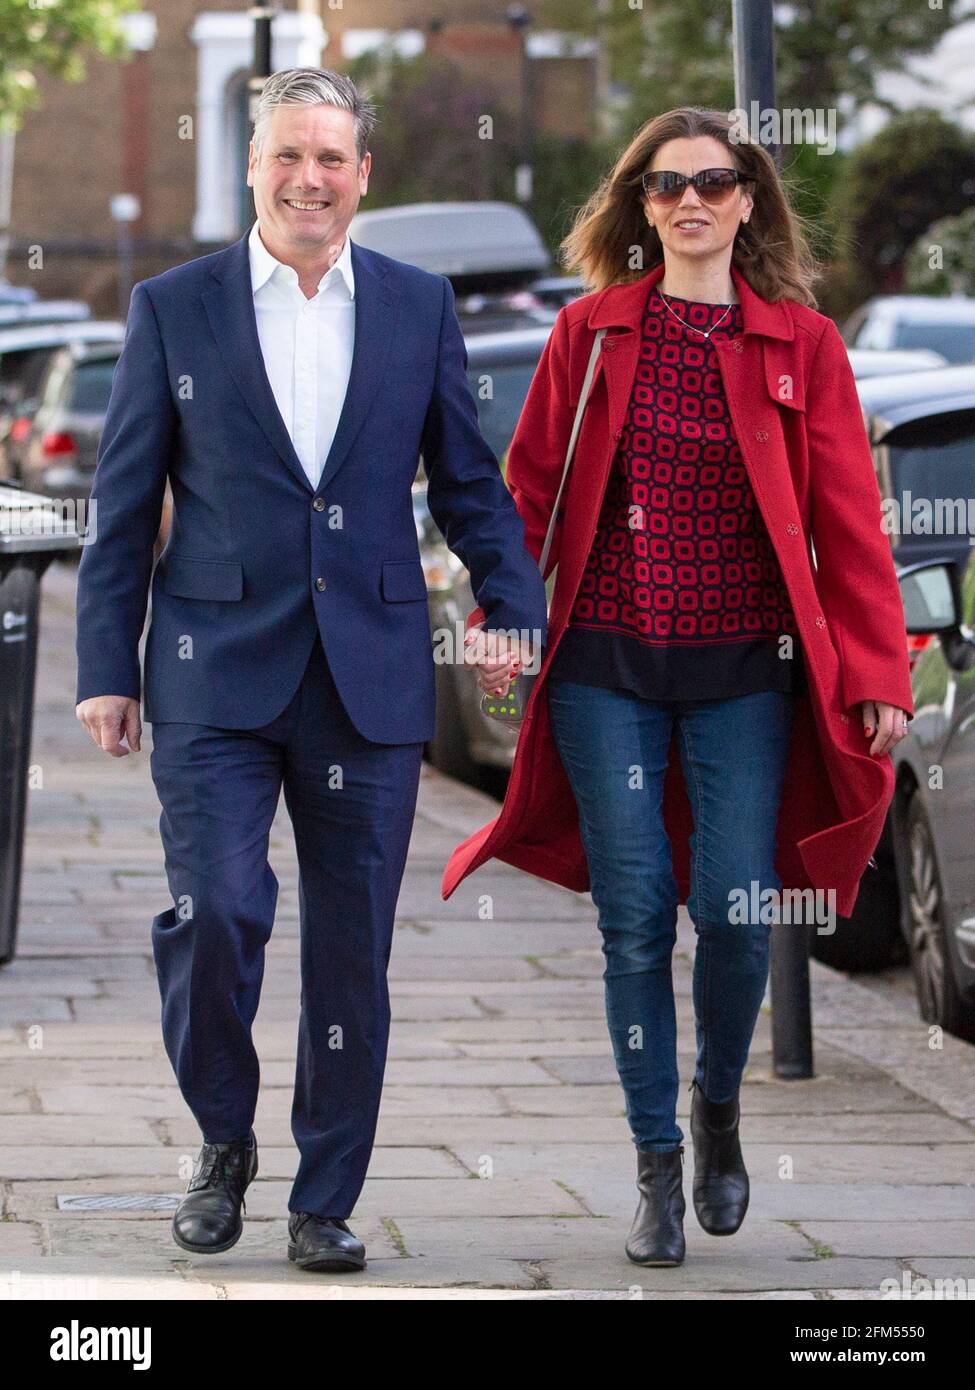 Labour Leader Sir Keir Starmer and wife Victoria leave walk to their local Polling Station on the 6th of May 2021, in North London, UK Stock Photo